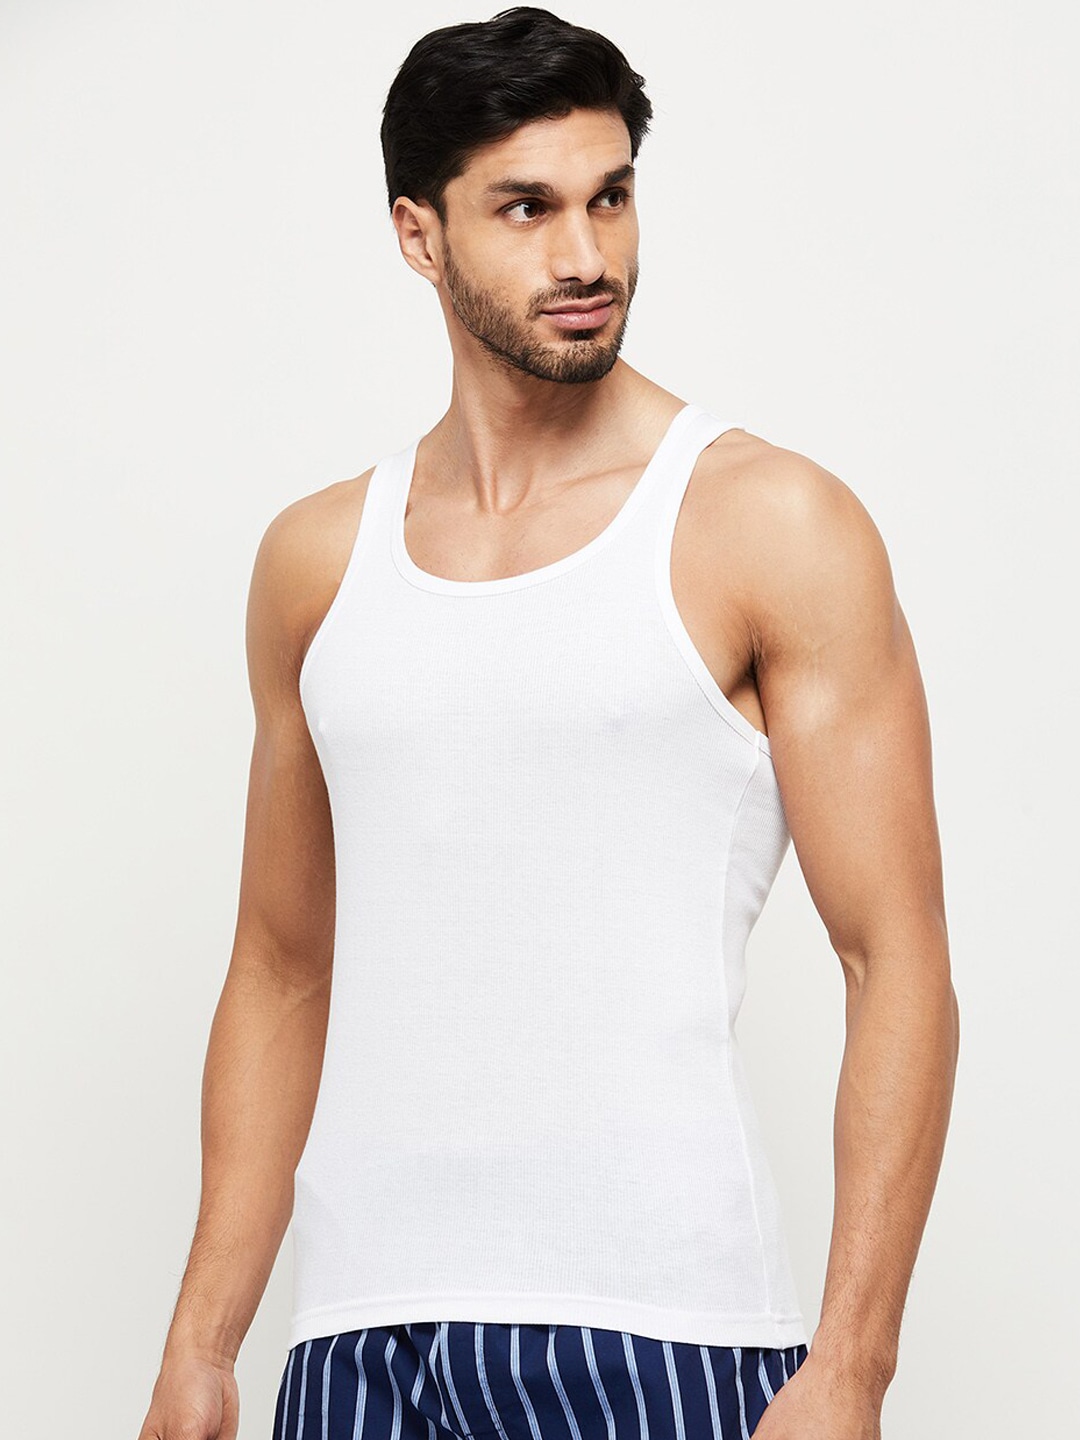 Clothing Innerwear Vests | max Men White Pack of 2 Solid Cotton Innerwear Vest NOOSNRBVWH3WHITE - ME68438